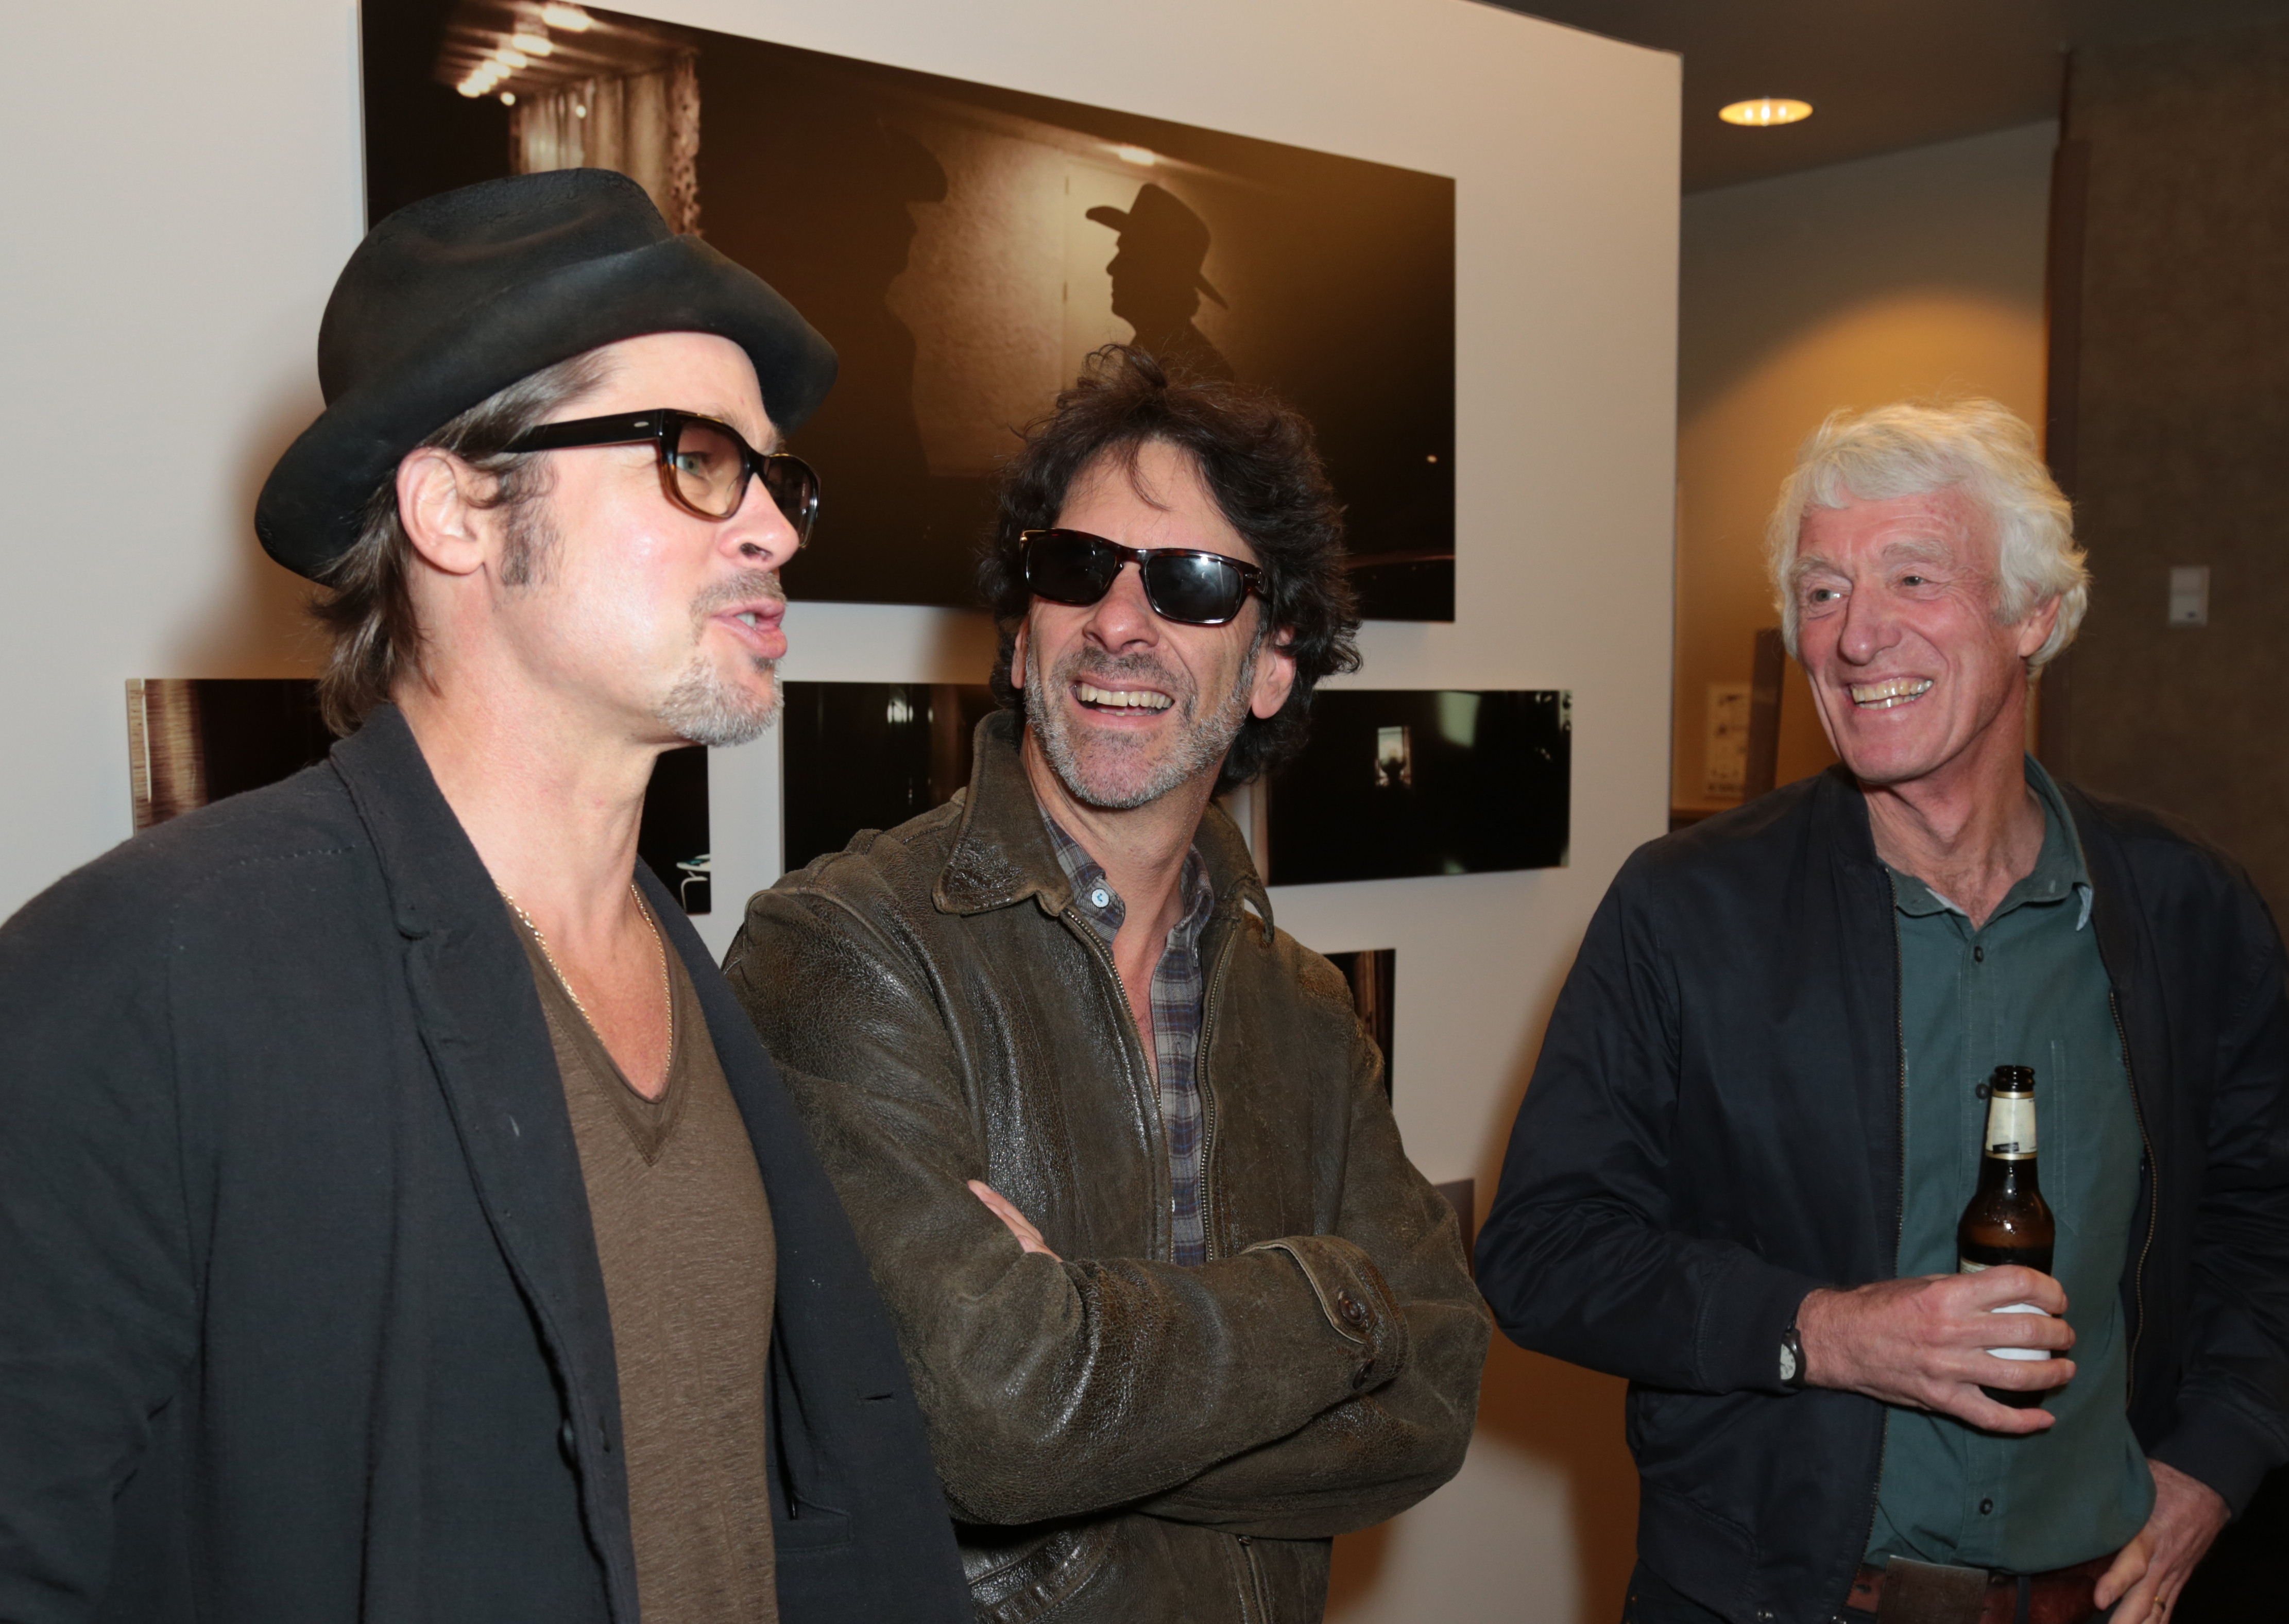 From left: Brad Pitt, Joel Coen and Roger Deakins mingle at the opening reception for Roger Deakins: Persistent Vision.